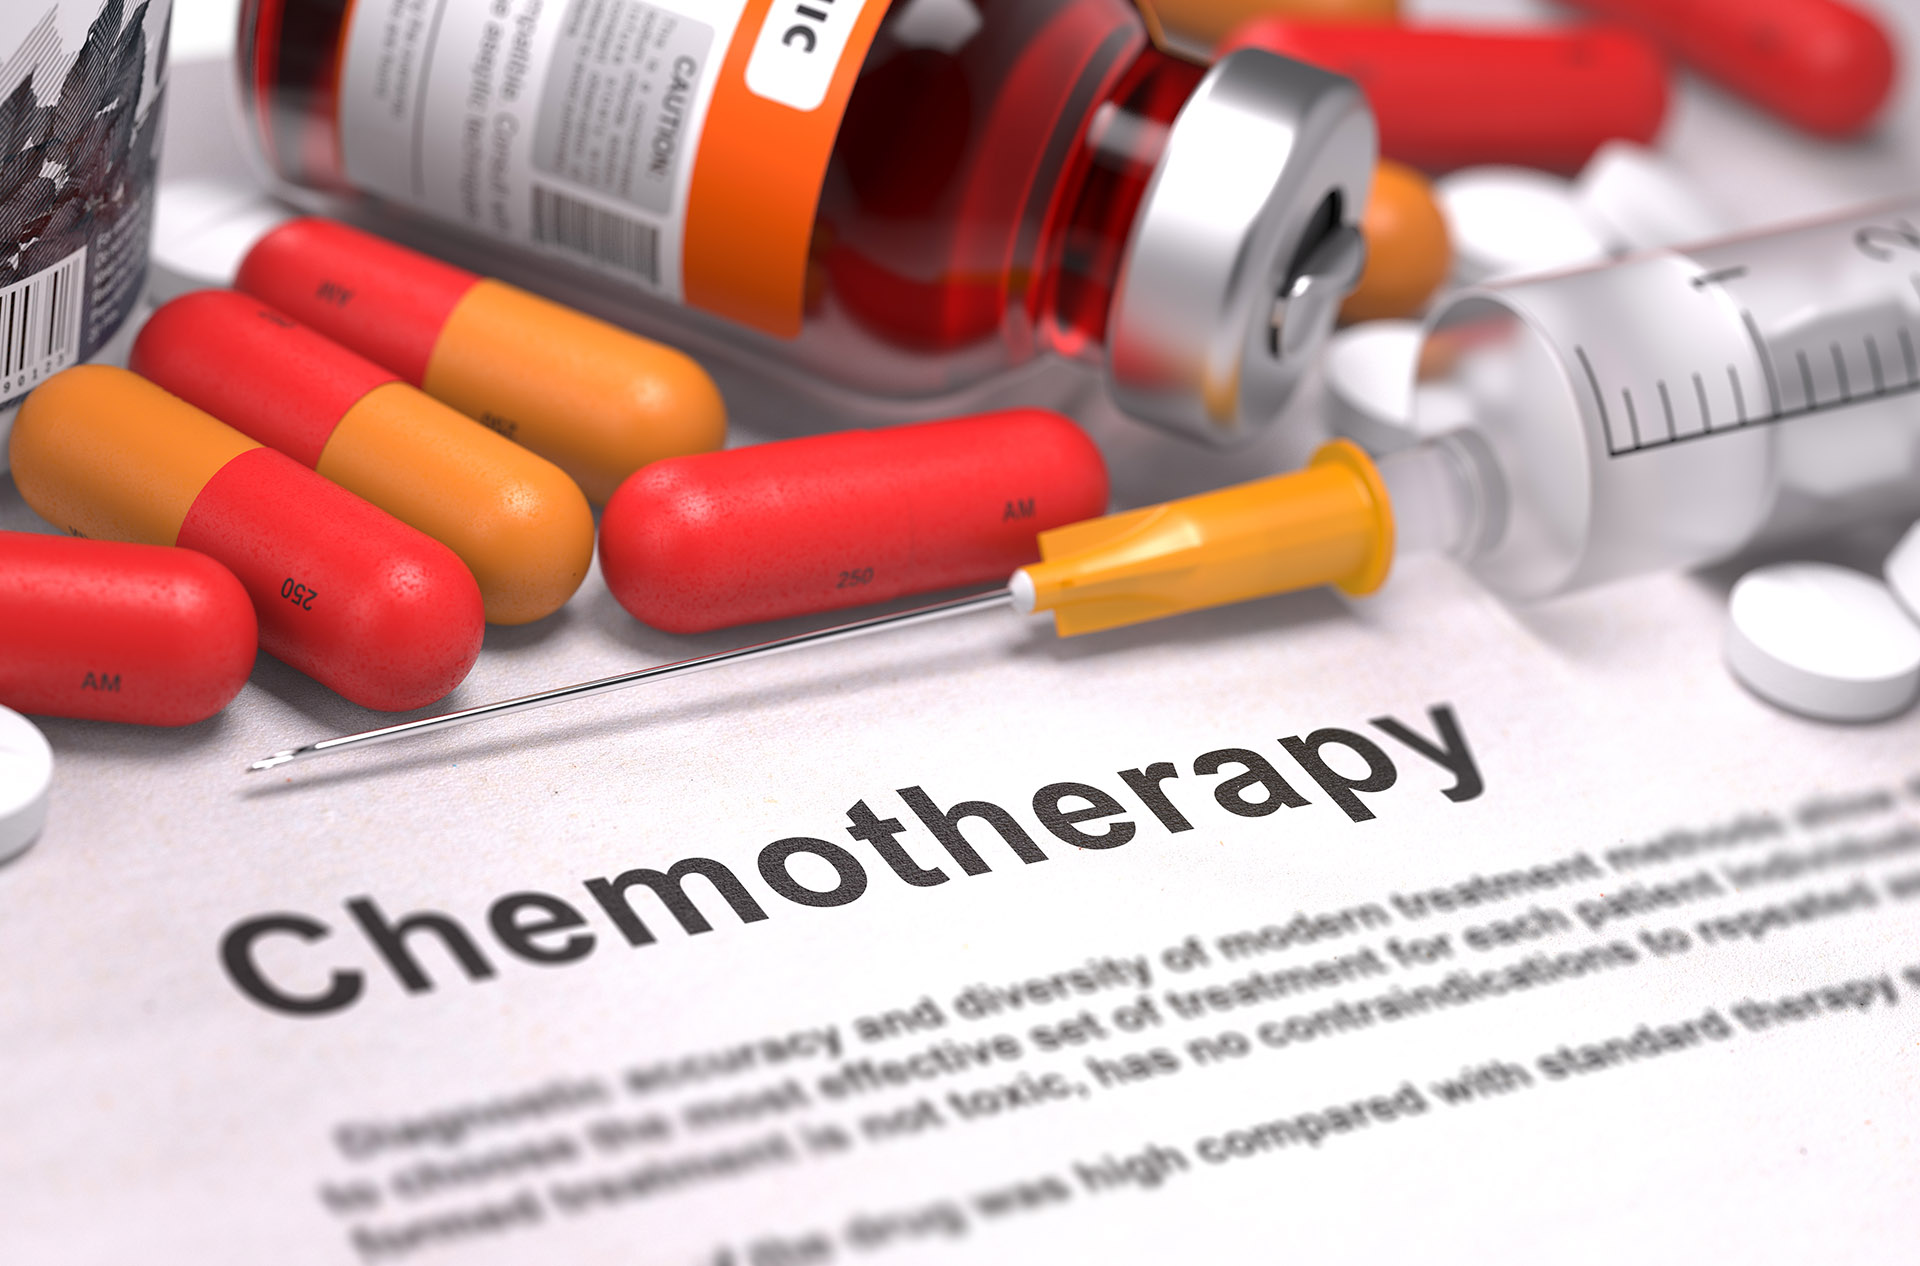 Chemotherapy - Medical Concept. On Background of Medicaments Composition - Red Pills, Injections and Syringe.